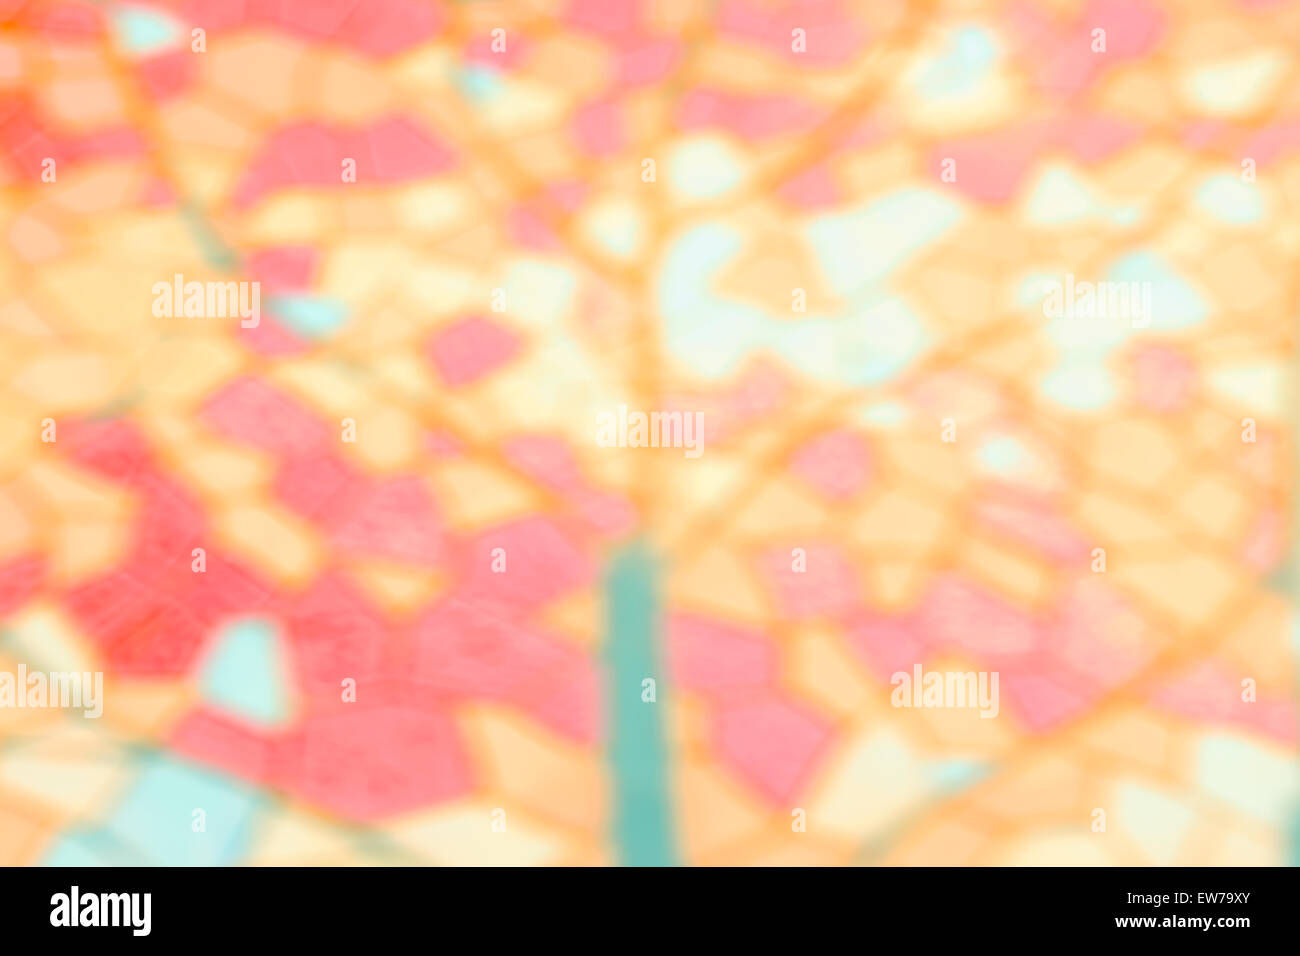 Abstract blurred natural background, pastel colors. Stock Photo